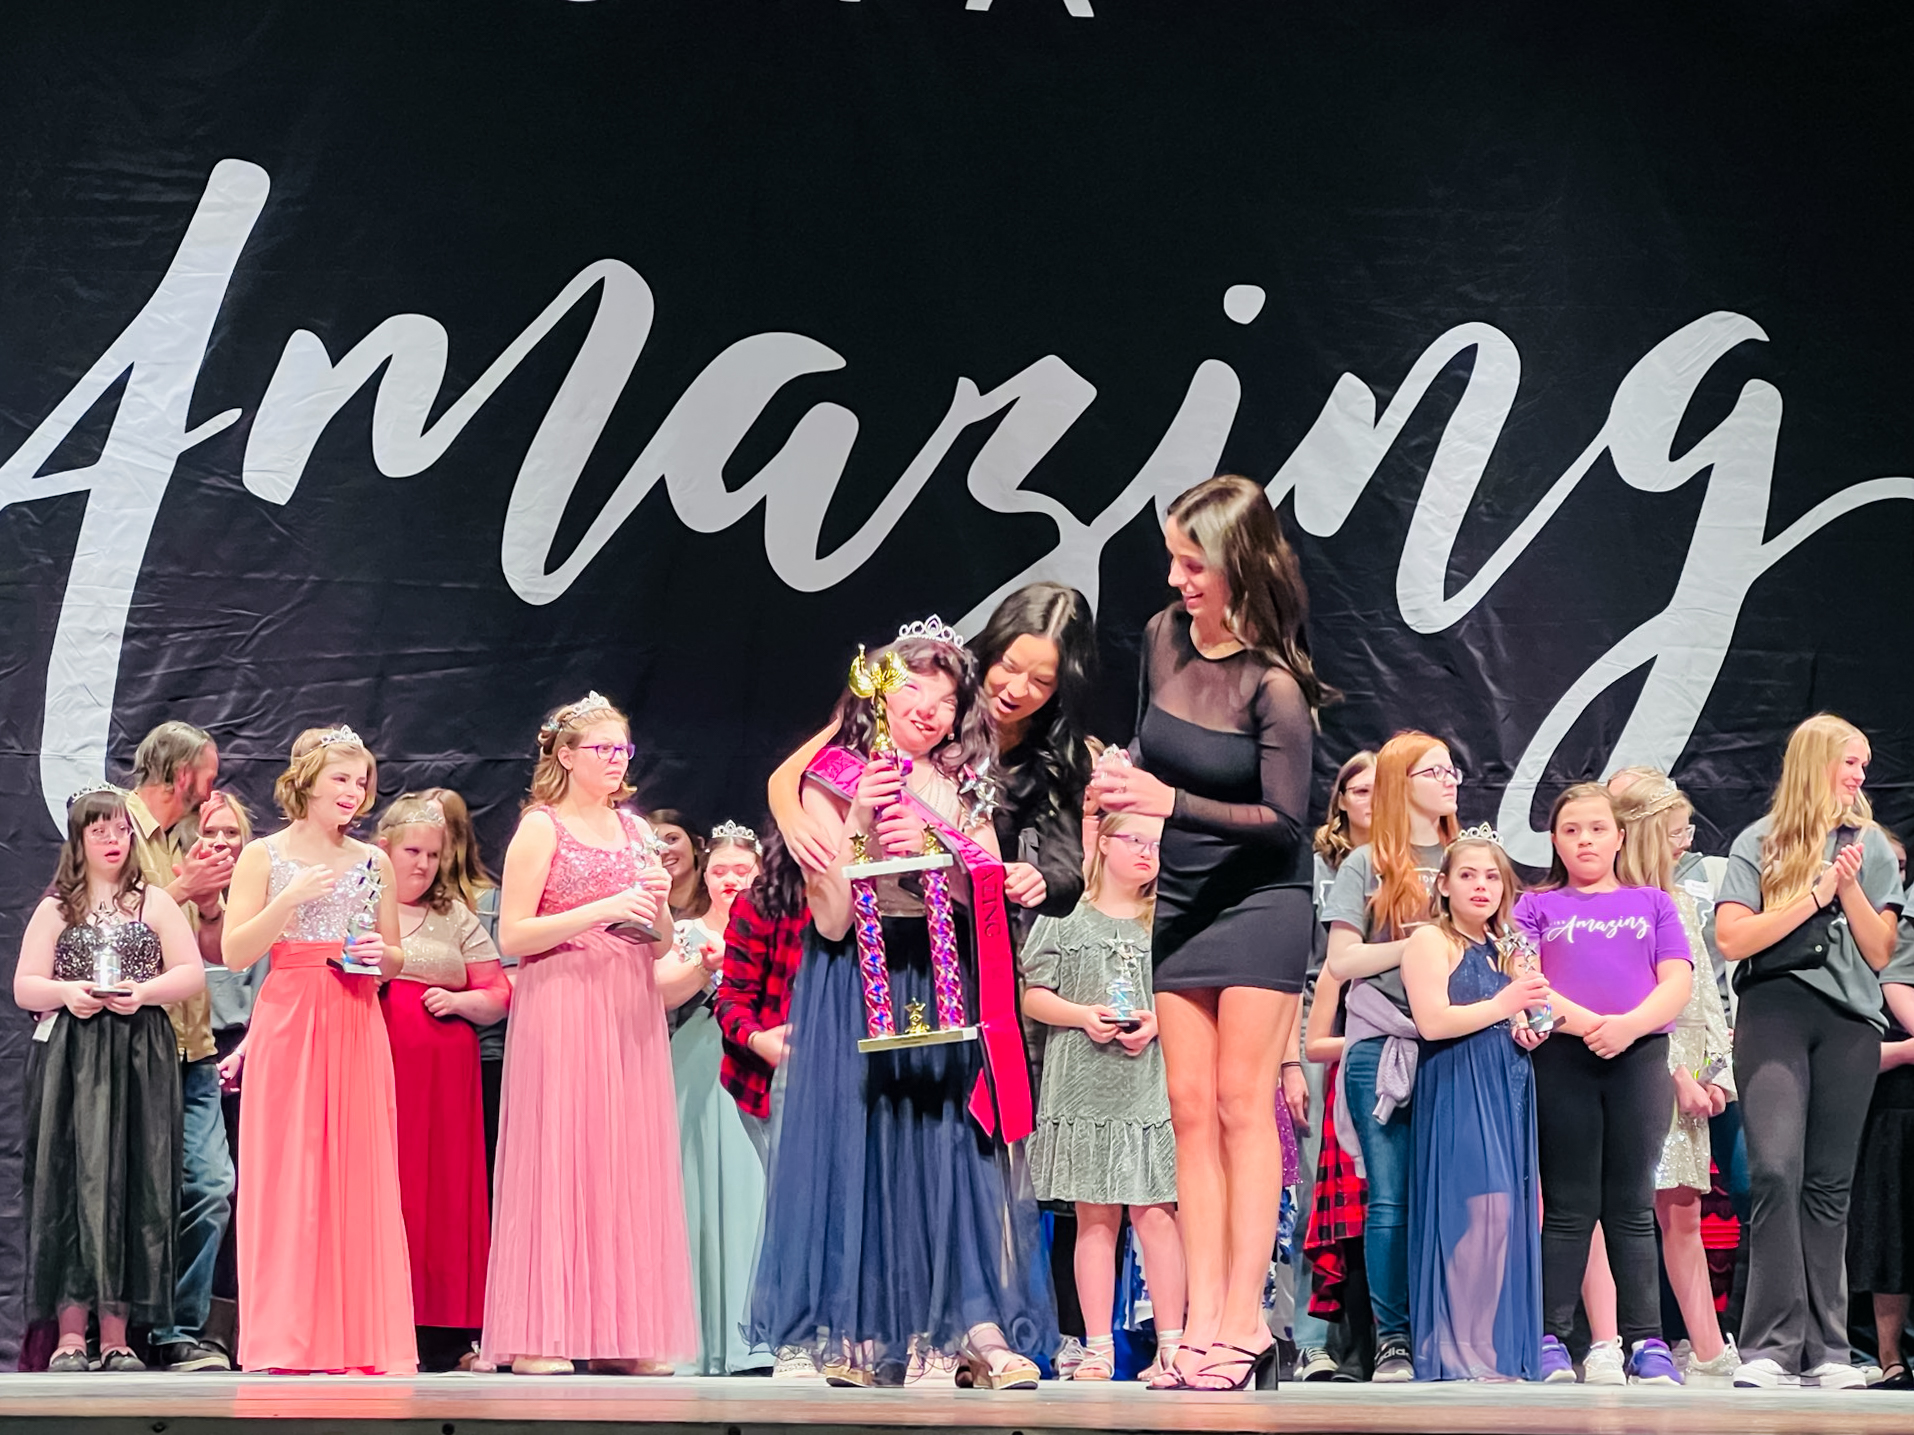 A contestant is crowned and given a trophy at Miss Iowa Amazing, February 2023.